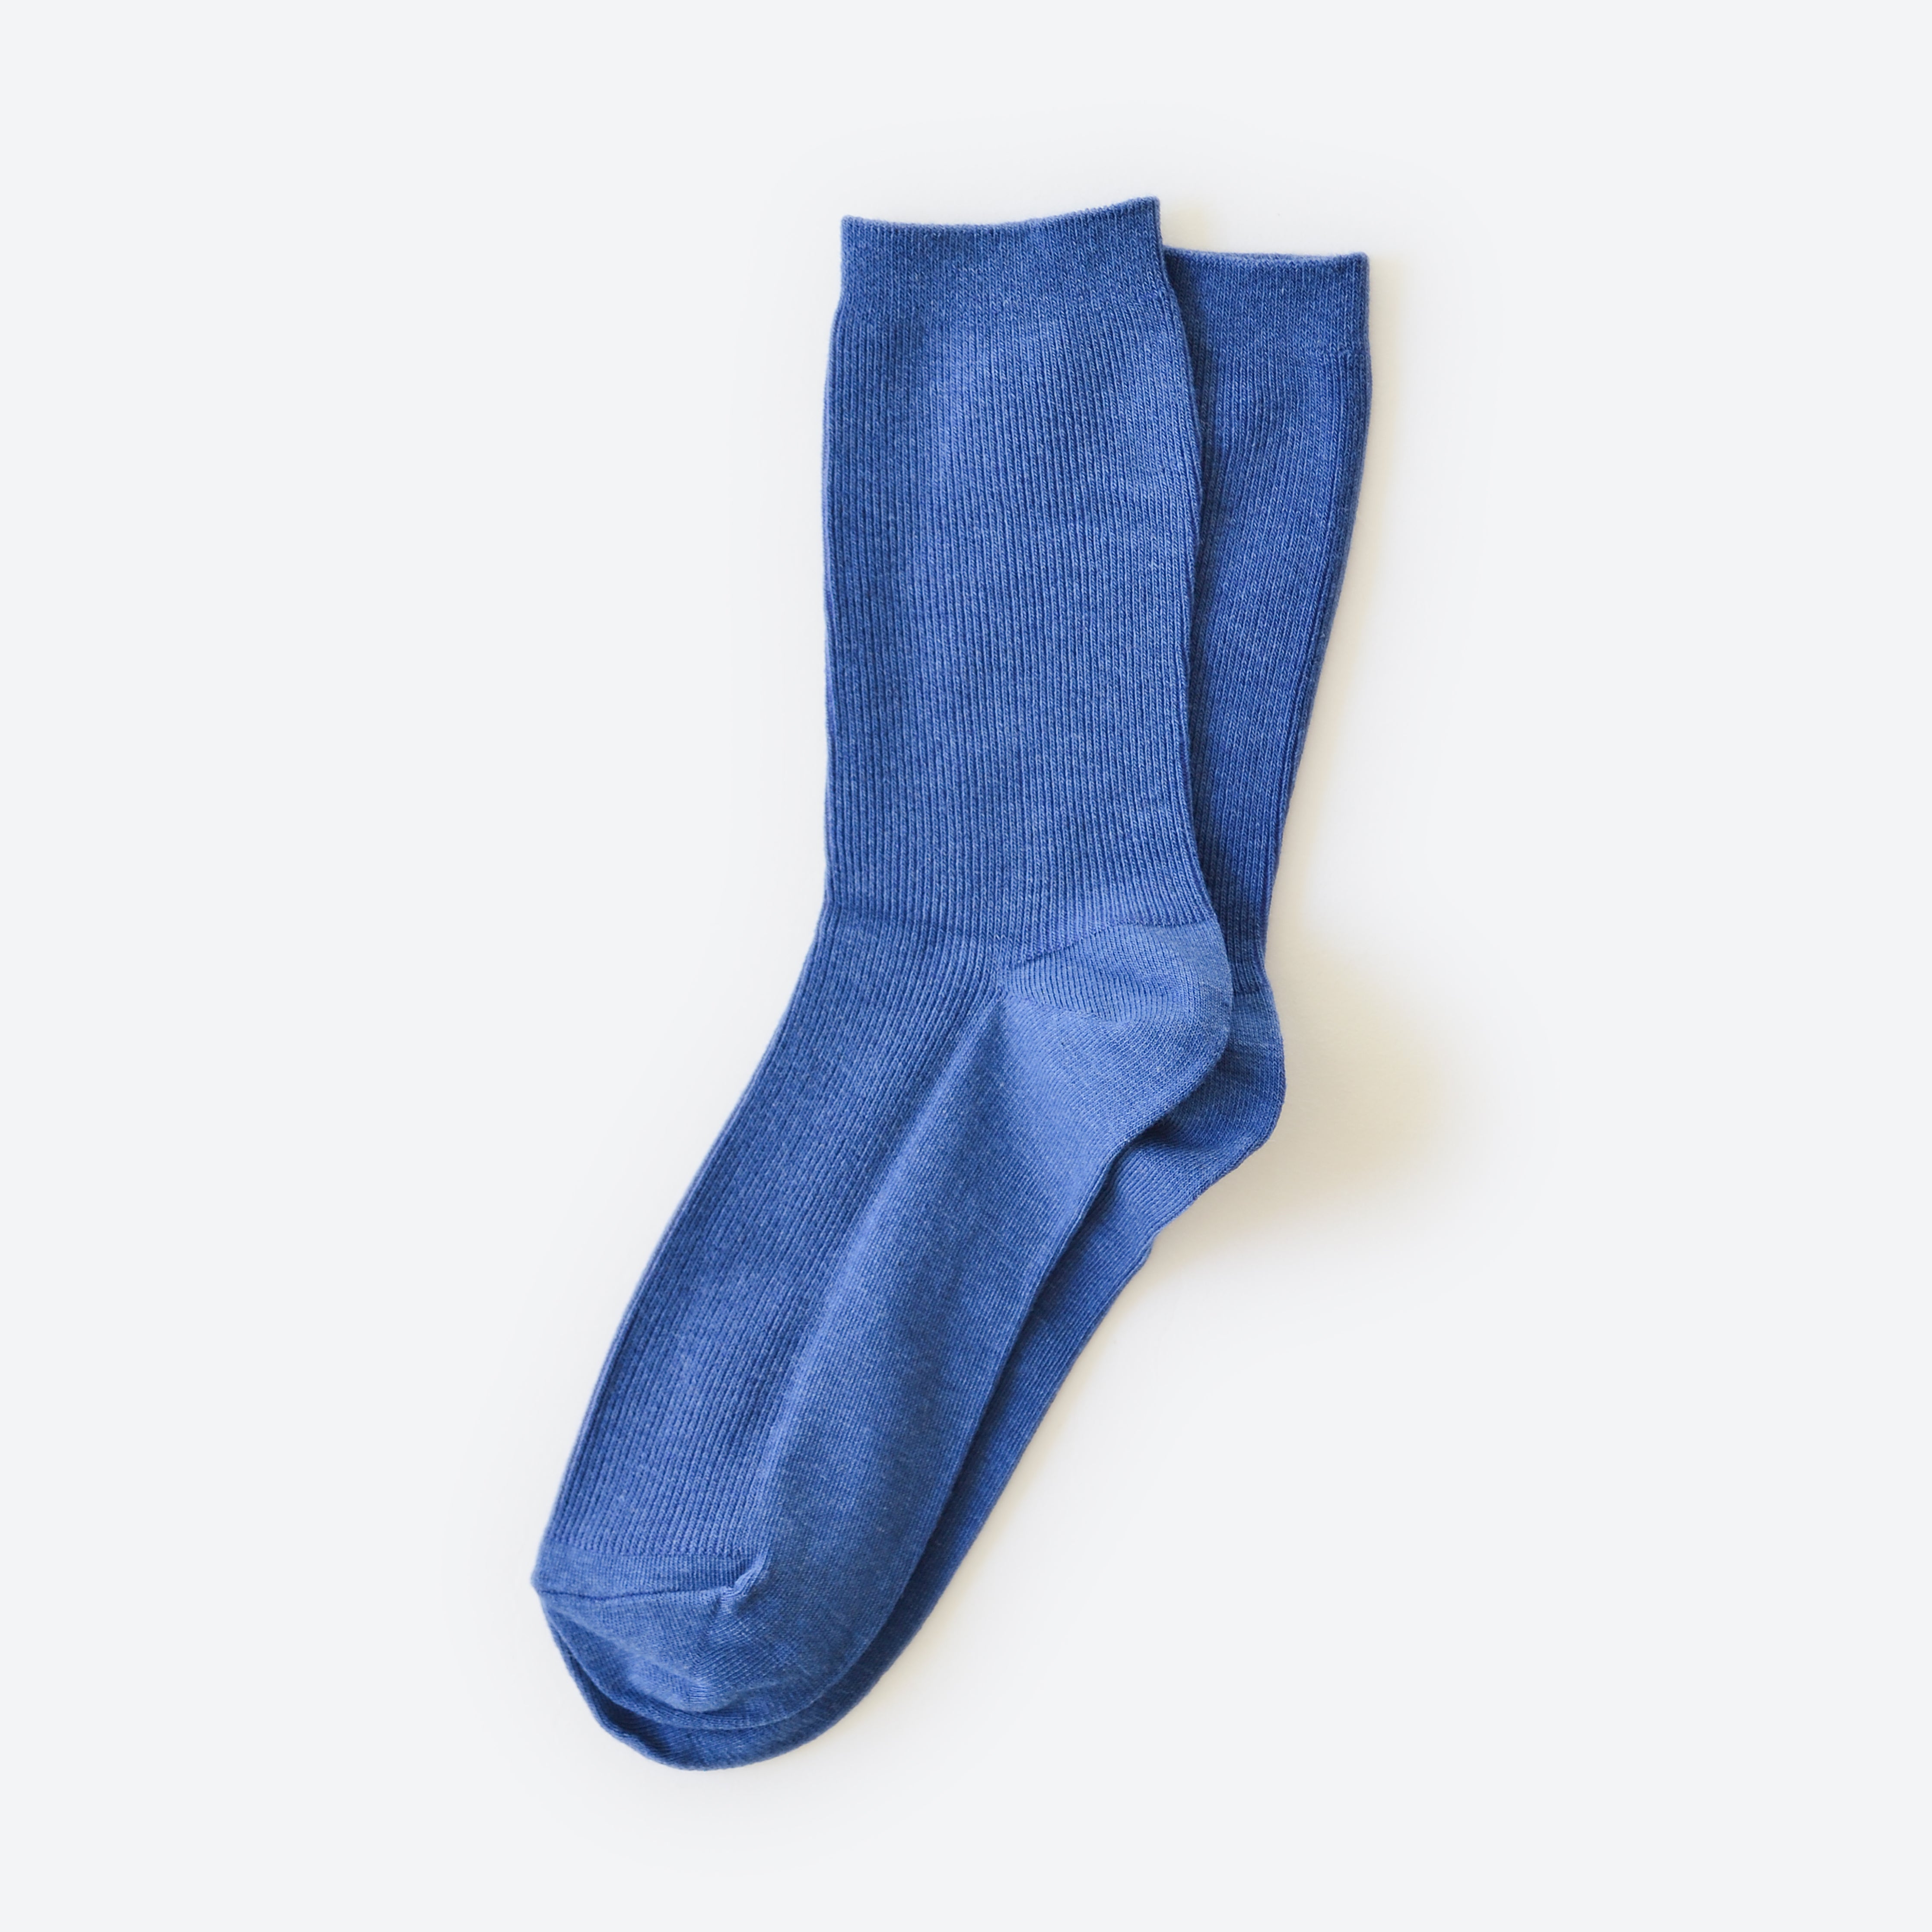 Hooray Sock Co.&#39;s Ocean Crew Socks: Plunge into fashion with comfy cotton in cute ocean blue. Shorter crew length. 80% cotton, 20% spandex. Made in South Korea. Small (Women&#39;s 4-10).